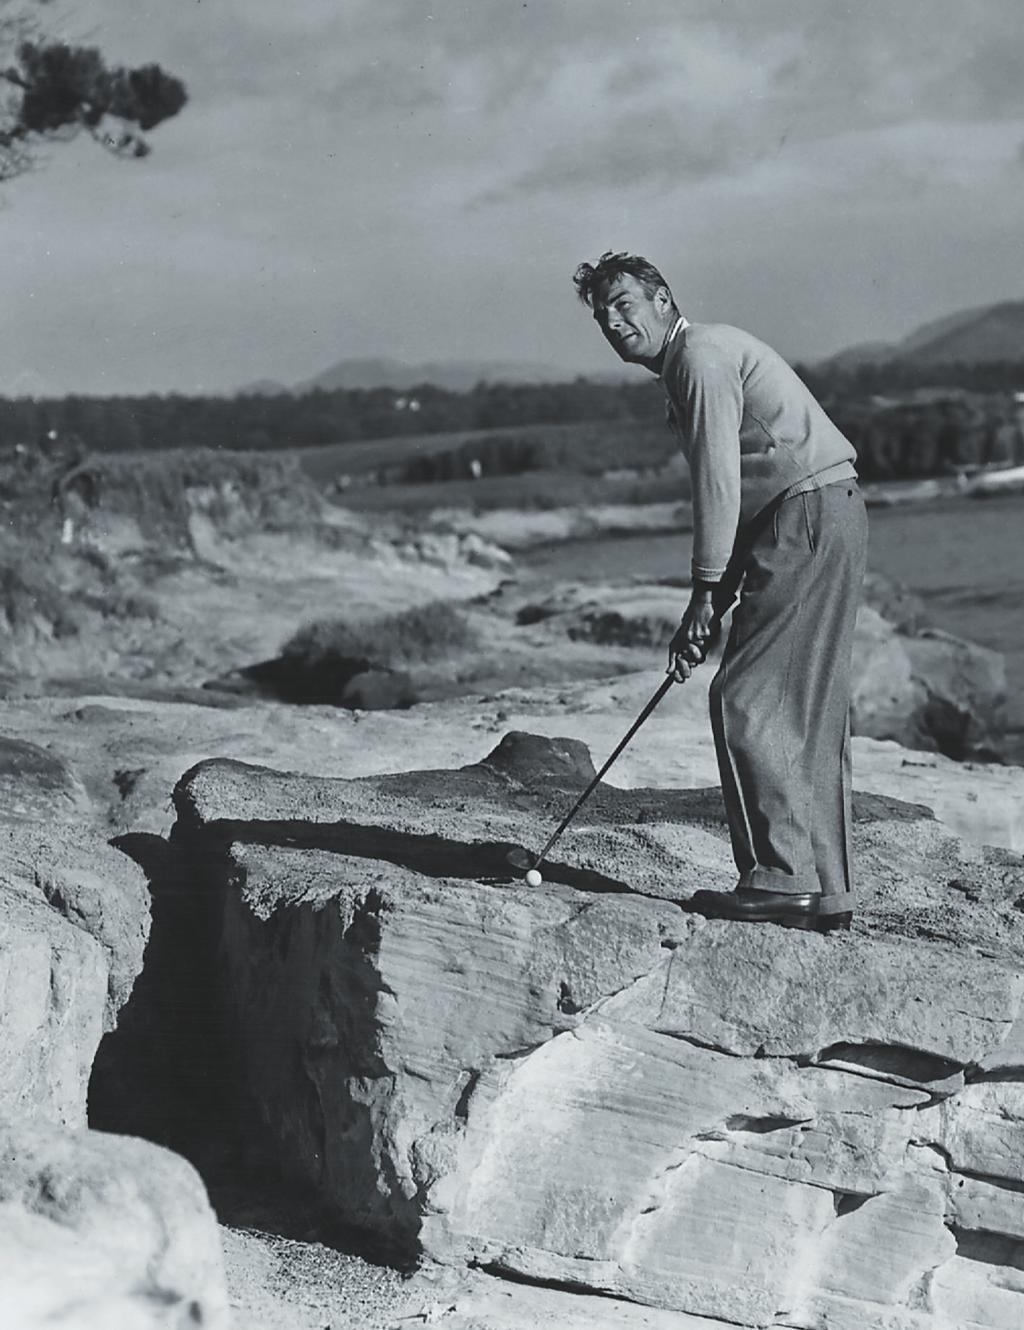 Part of the storied history of the U.S. Amateur Championship at Pebble Beach is the contestants that it would attract. Among the starters in the 1947 U.S. Amateur was Hollywood star Randolph Scott, which marked the first time a movie star qualified for play.